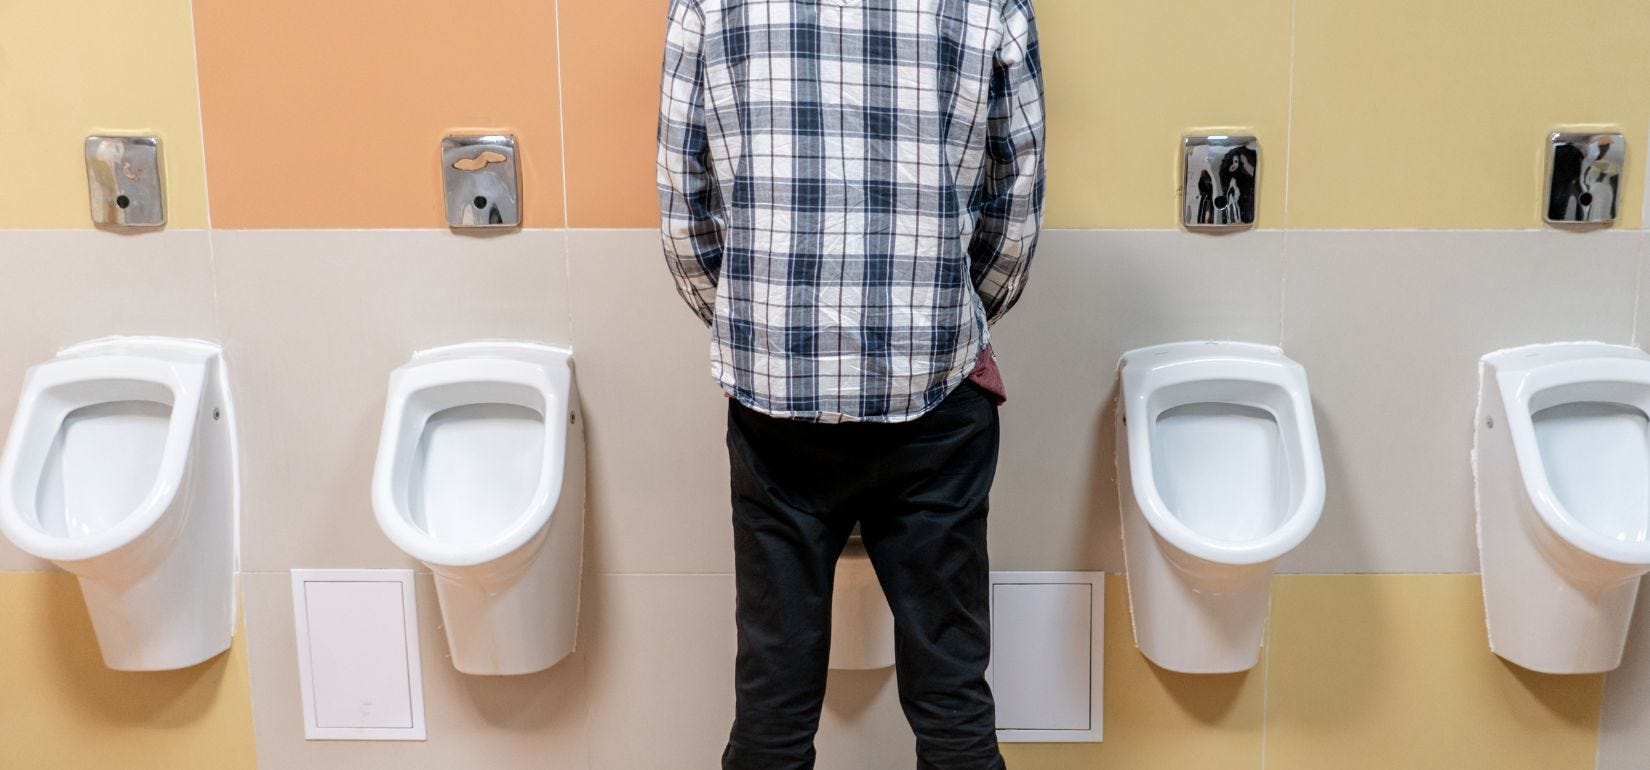 The Male Urinary Problem That Won't Just Go Away